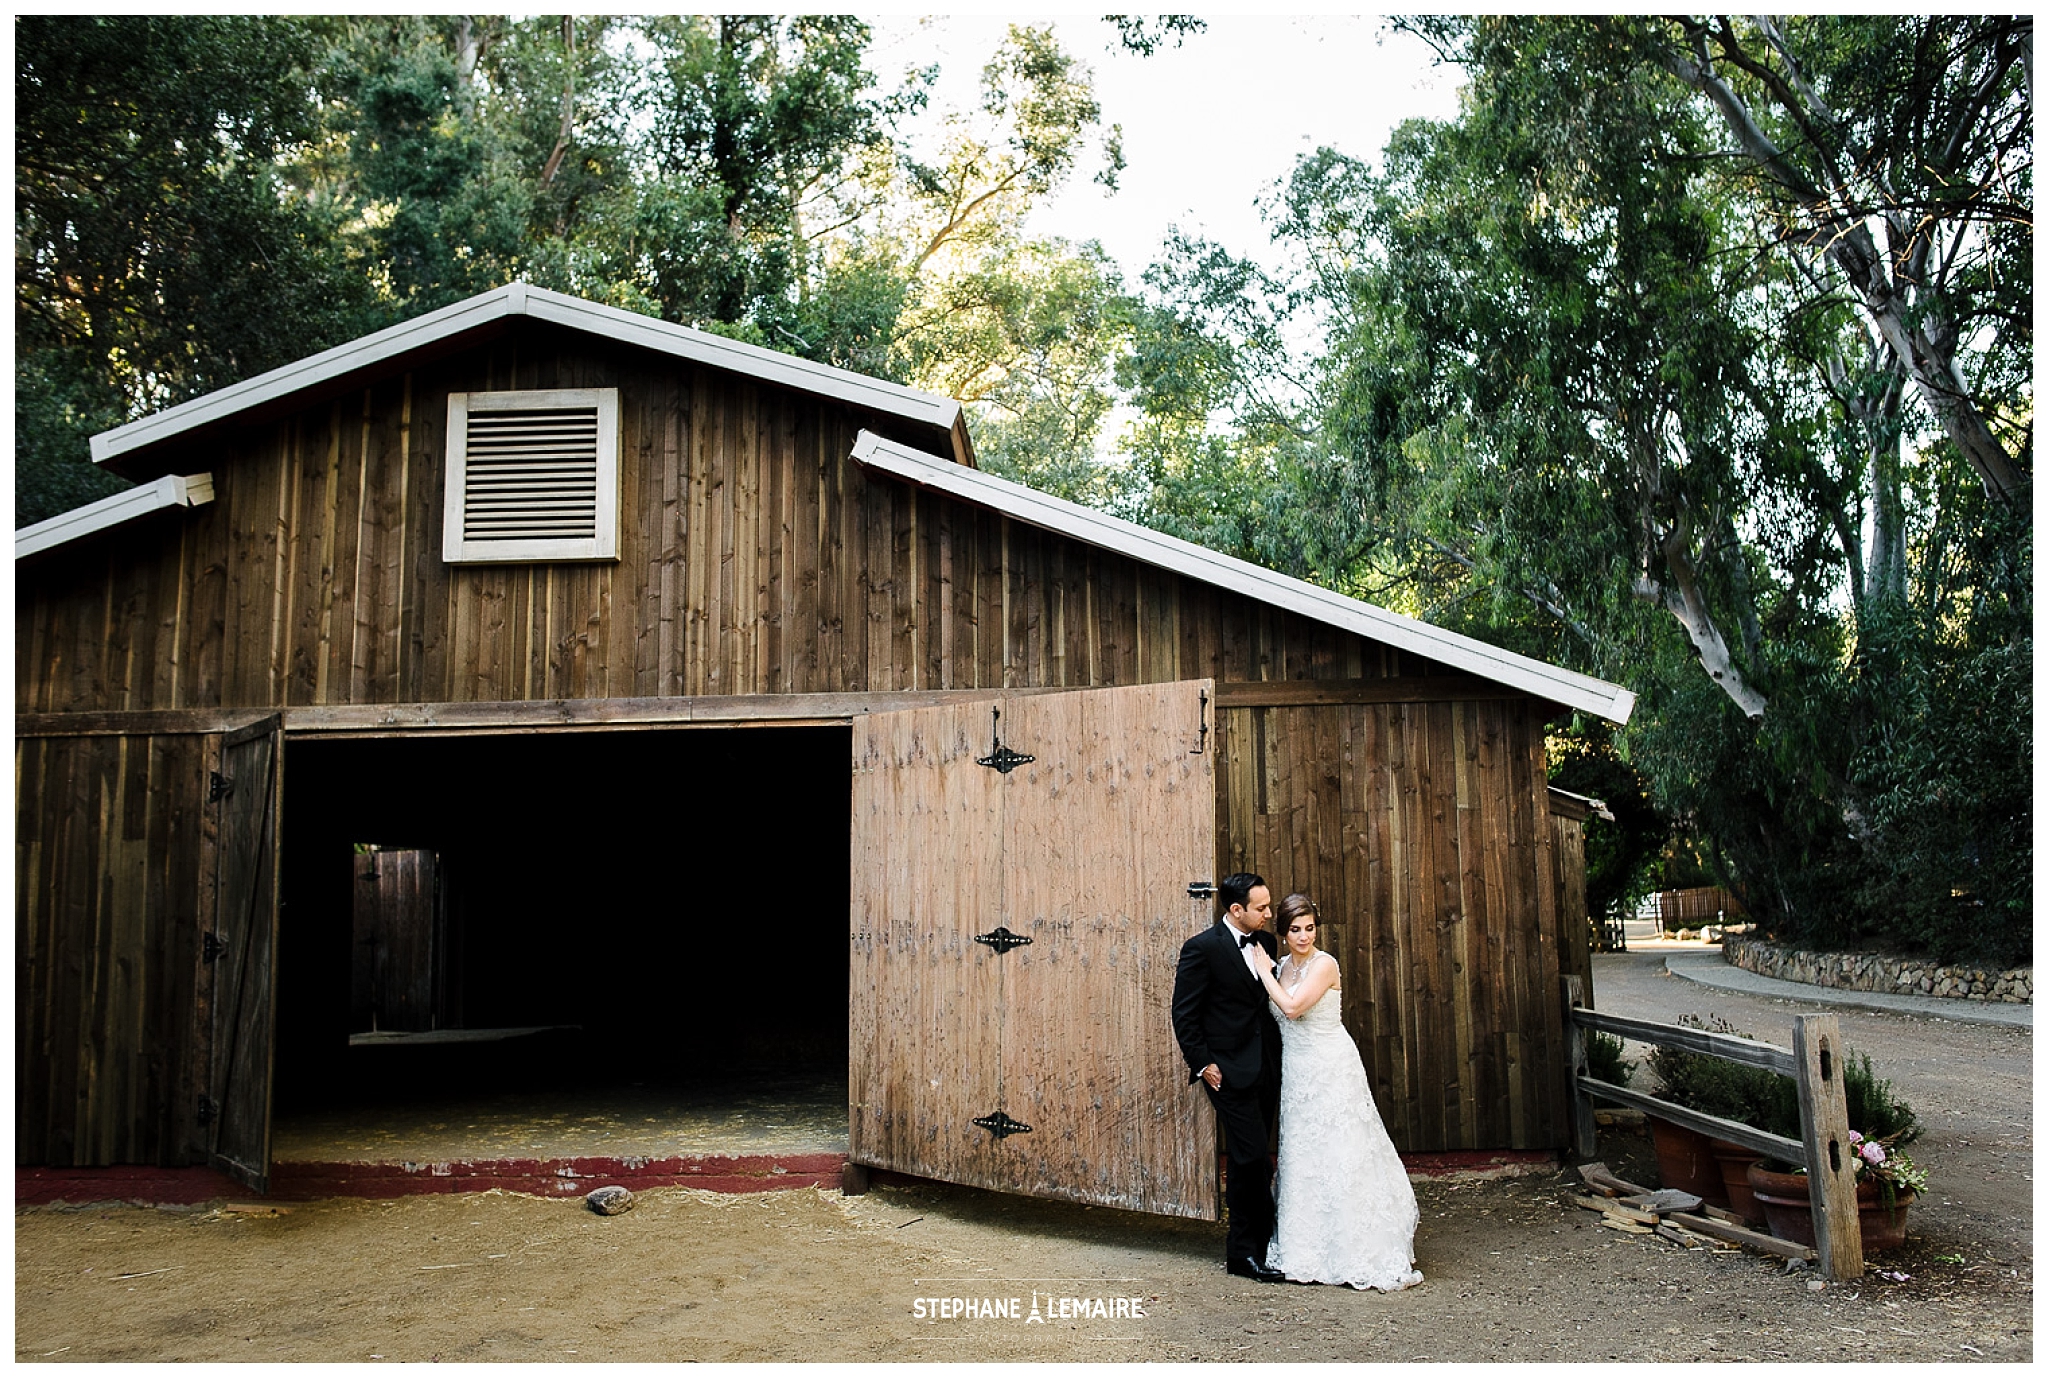 Calamigos Ranch wedding portrait at a barn by Stephane Lemaire Photography 